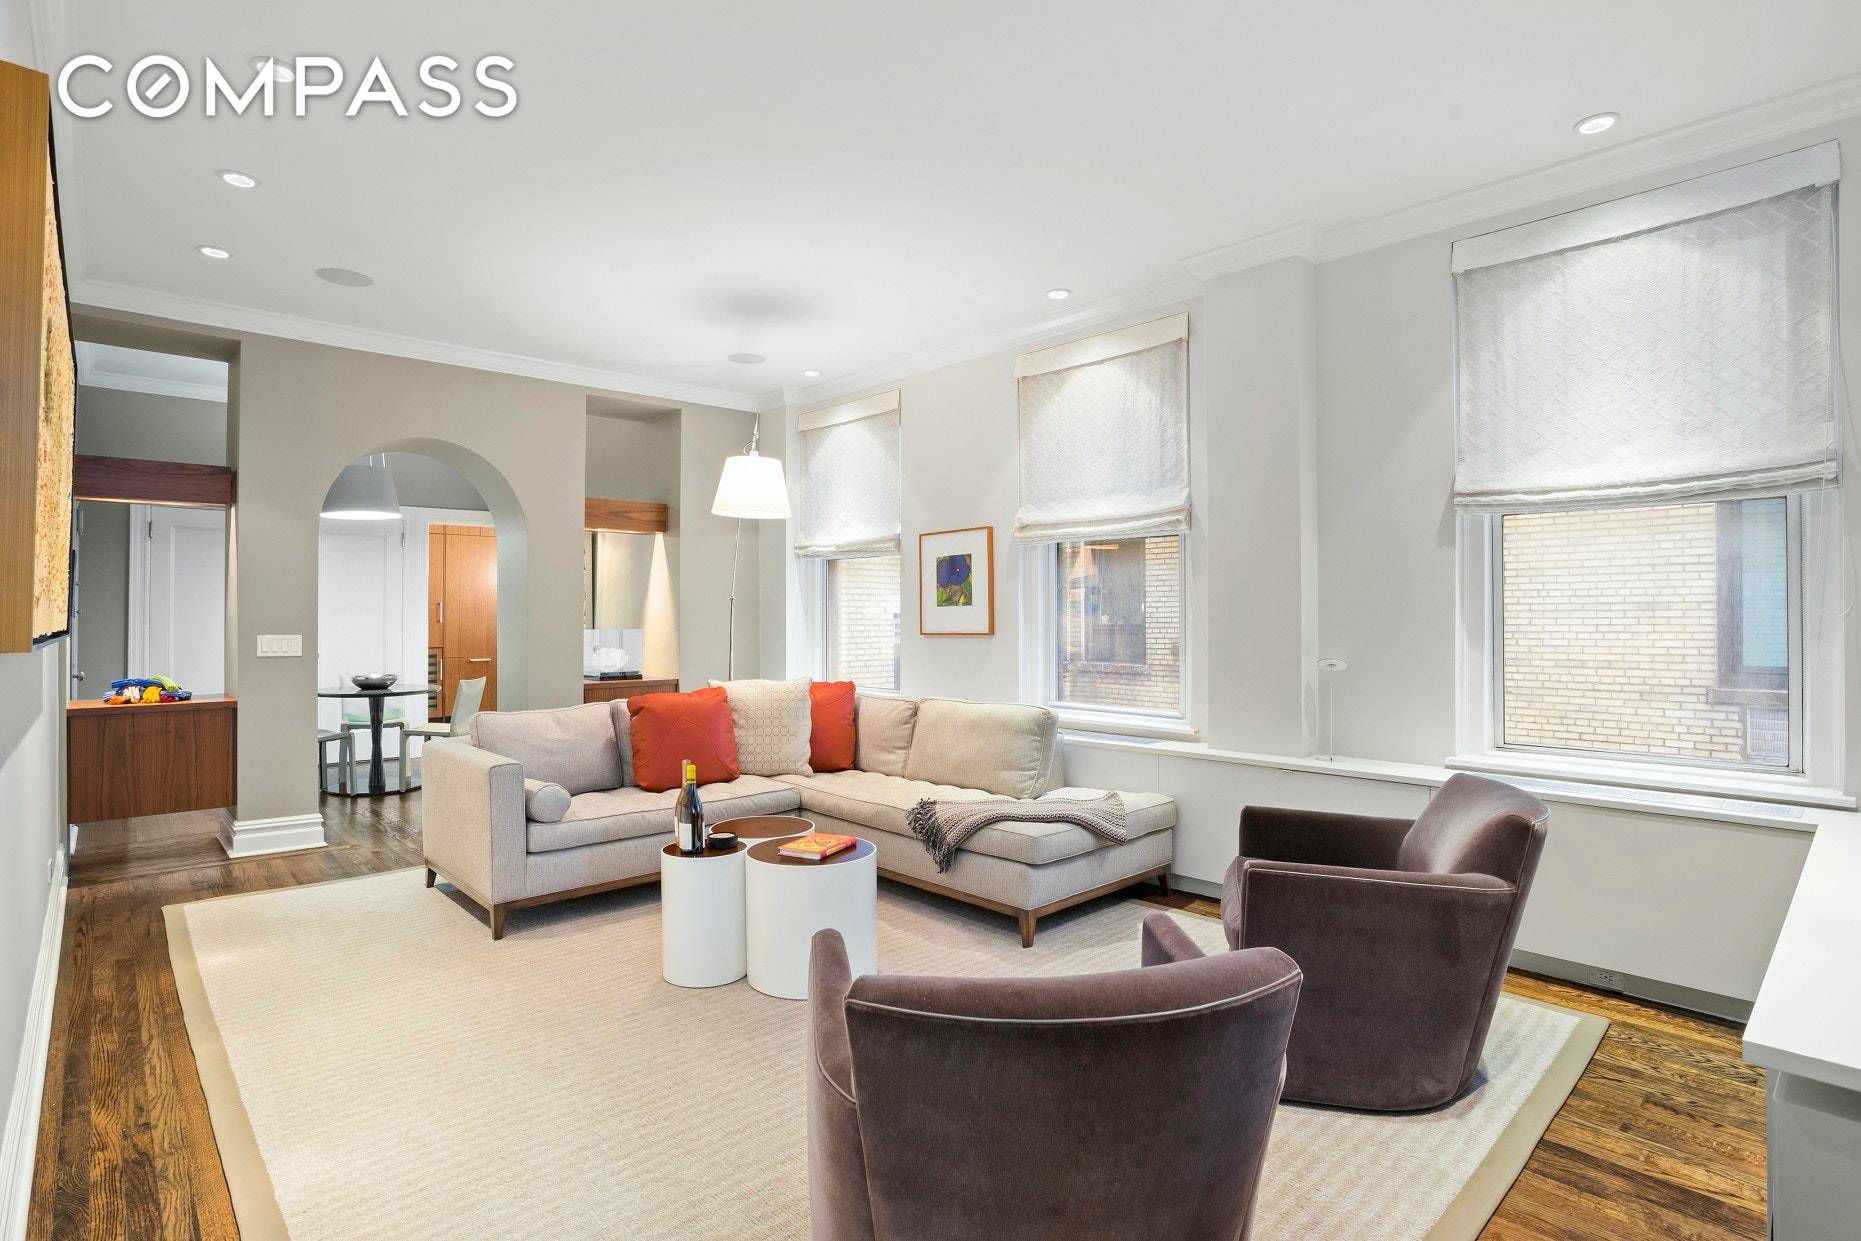 Park Ave Perfection This top floor one bedroom pre war apt has been gut renovated to perfection.